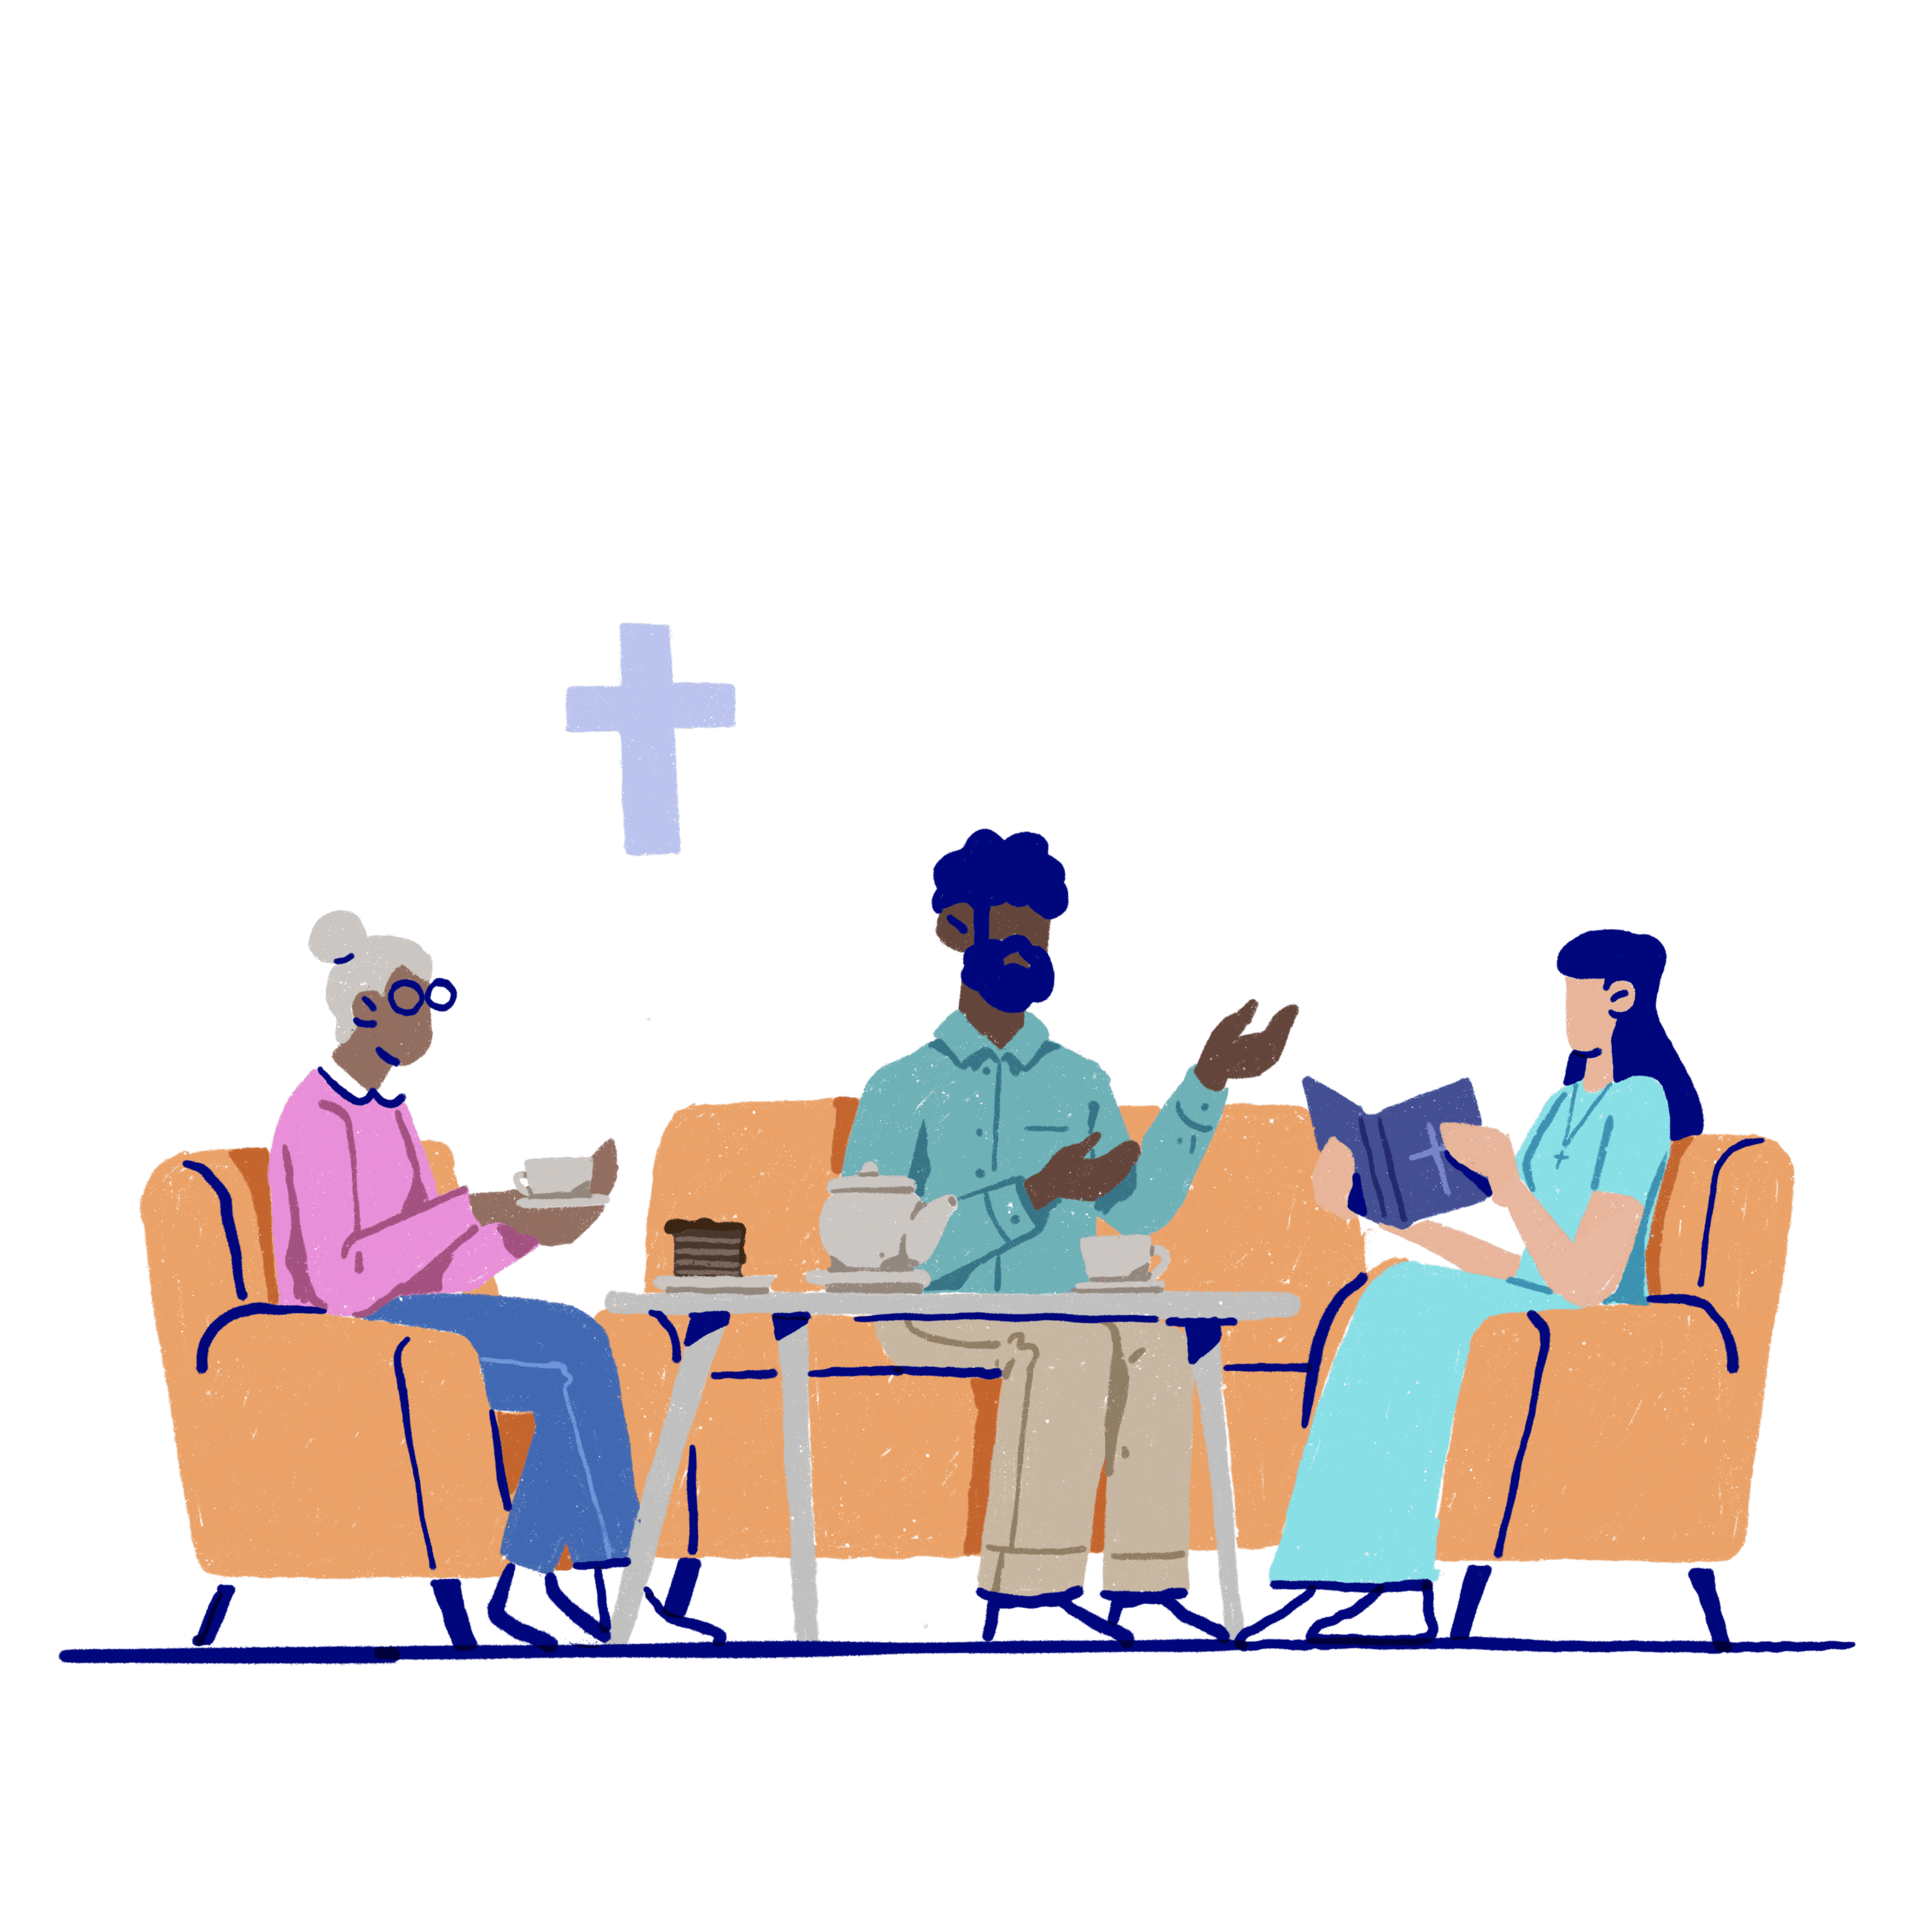 Three people sitting on chairs drinking tea and talking